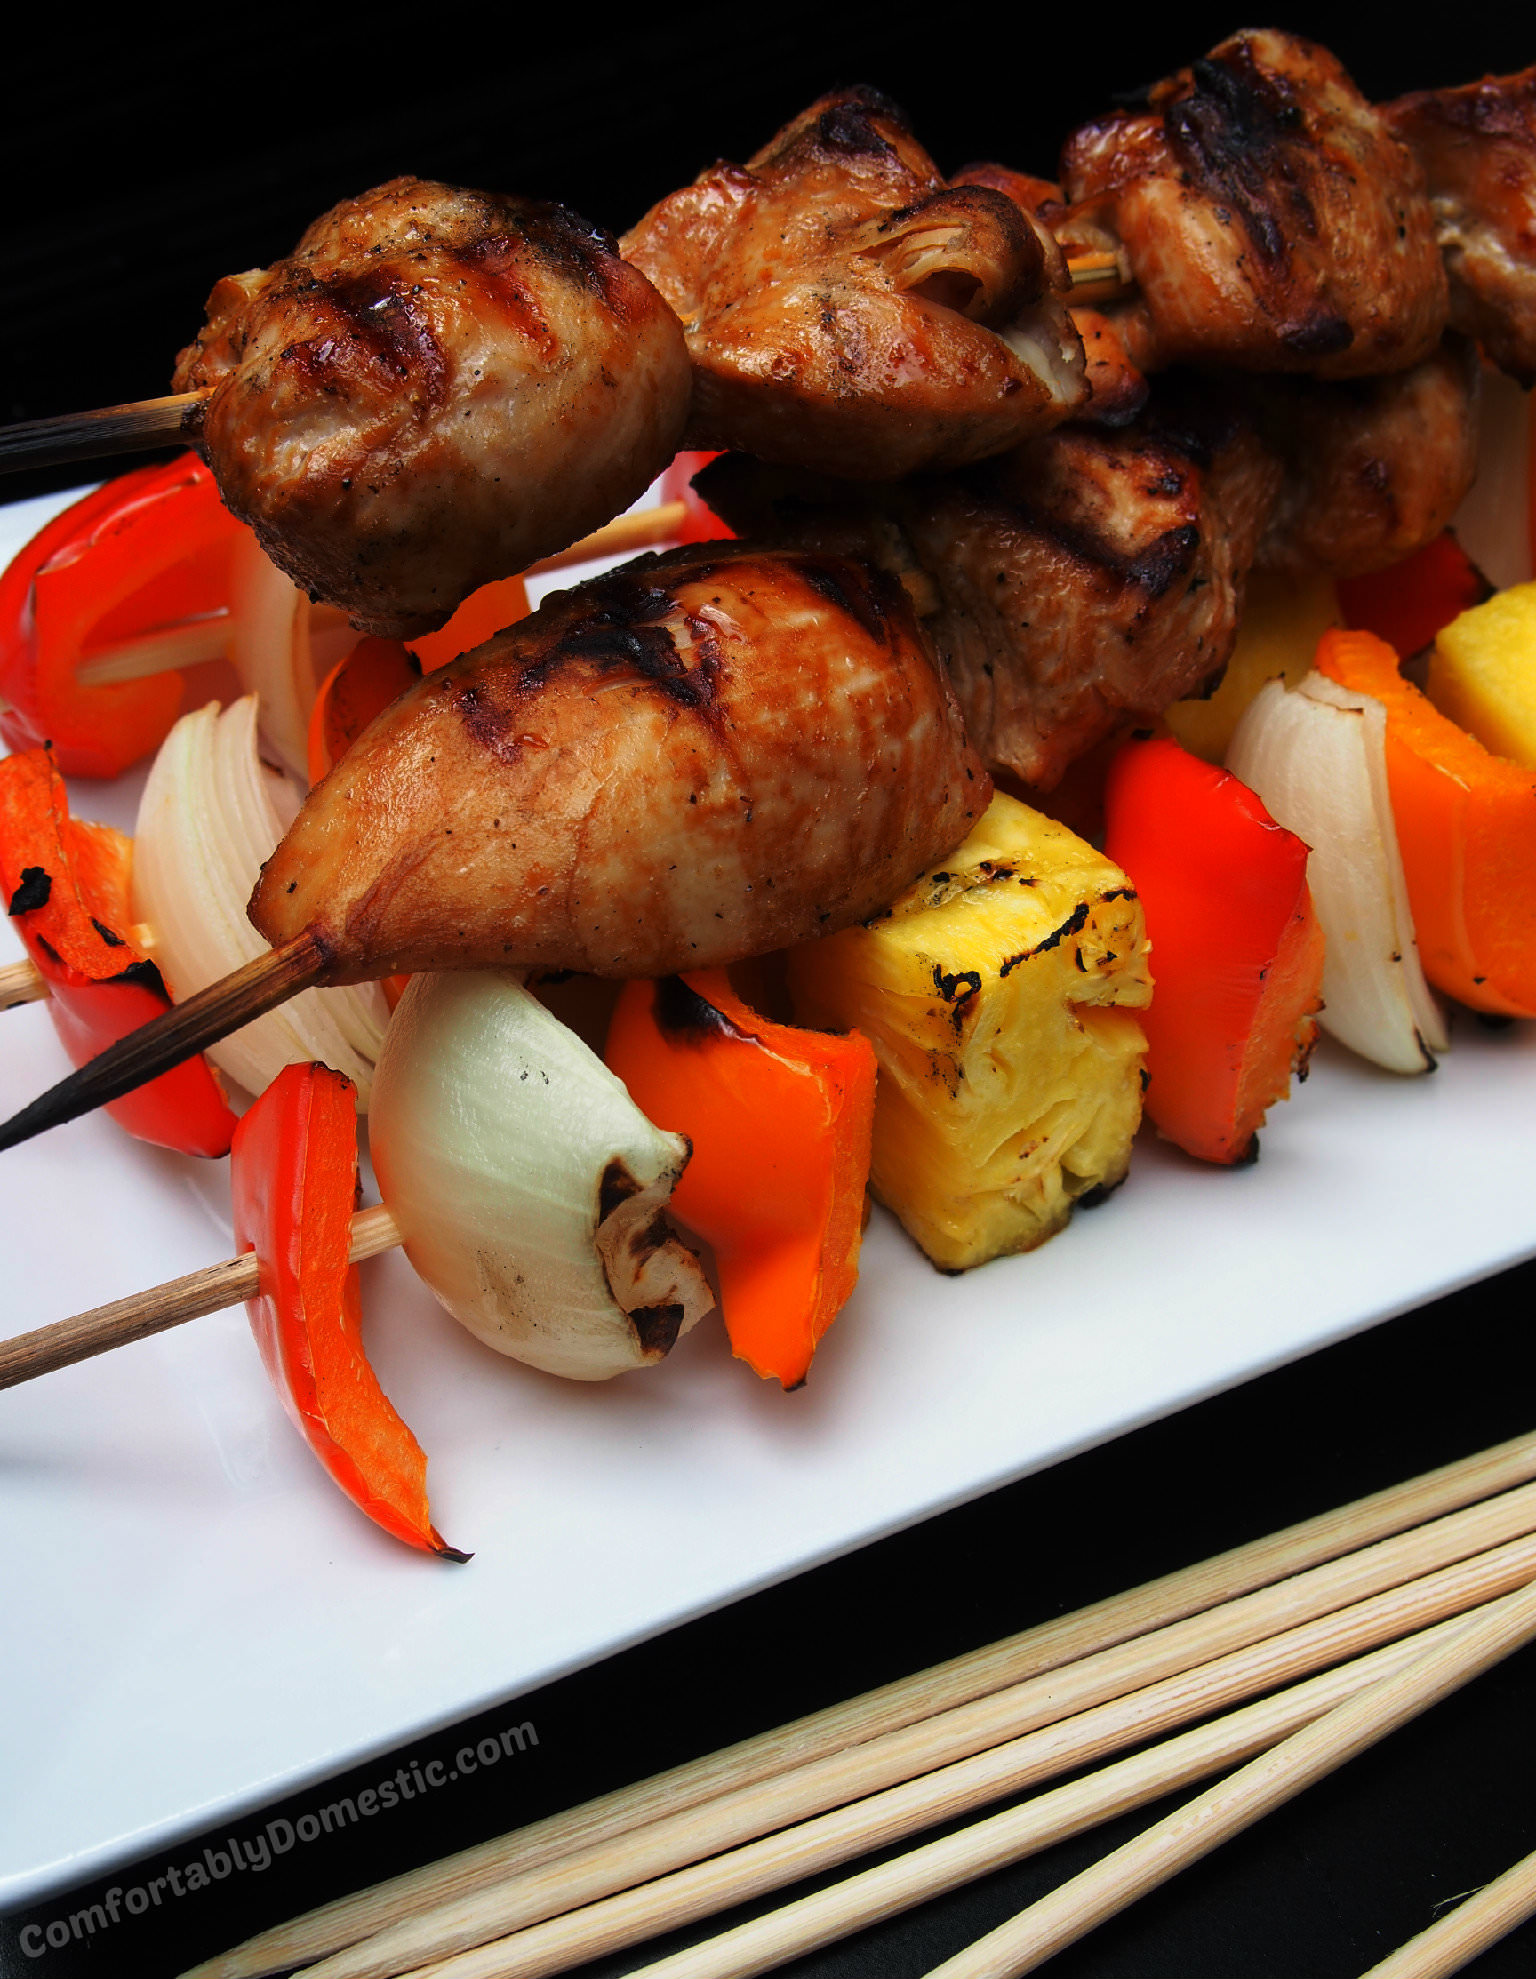 Soy Ginger Chicken Kabobs and 3 Easy Entertaining Rules | ComfortablyDomestic.com